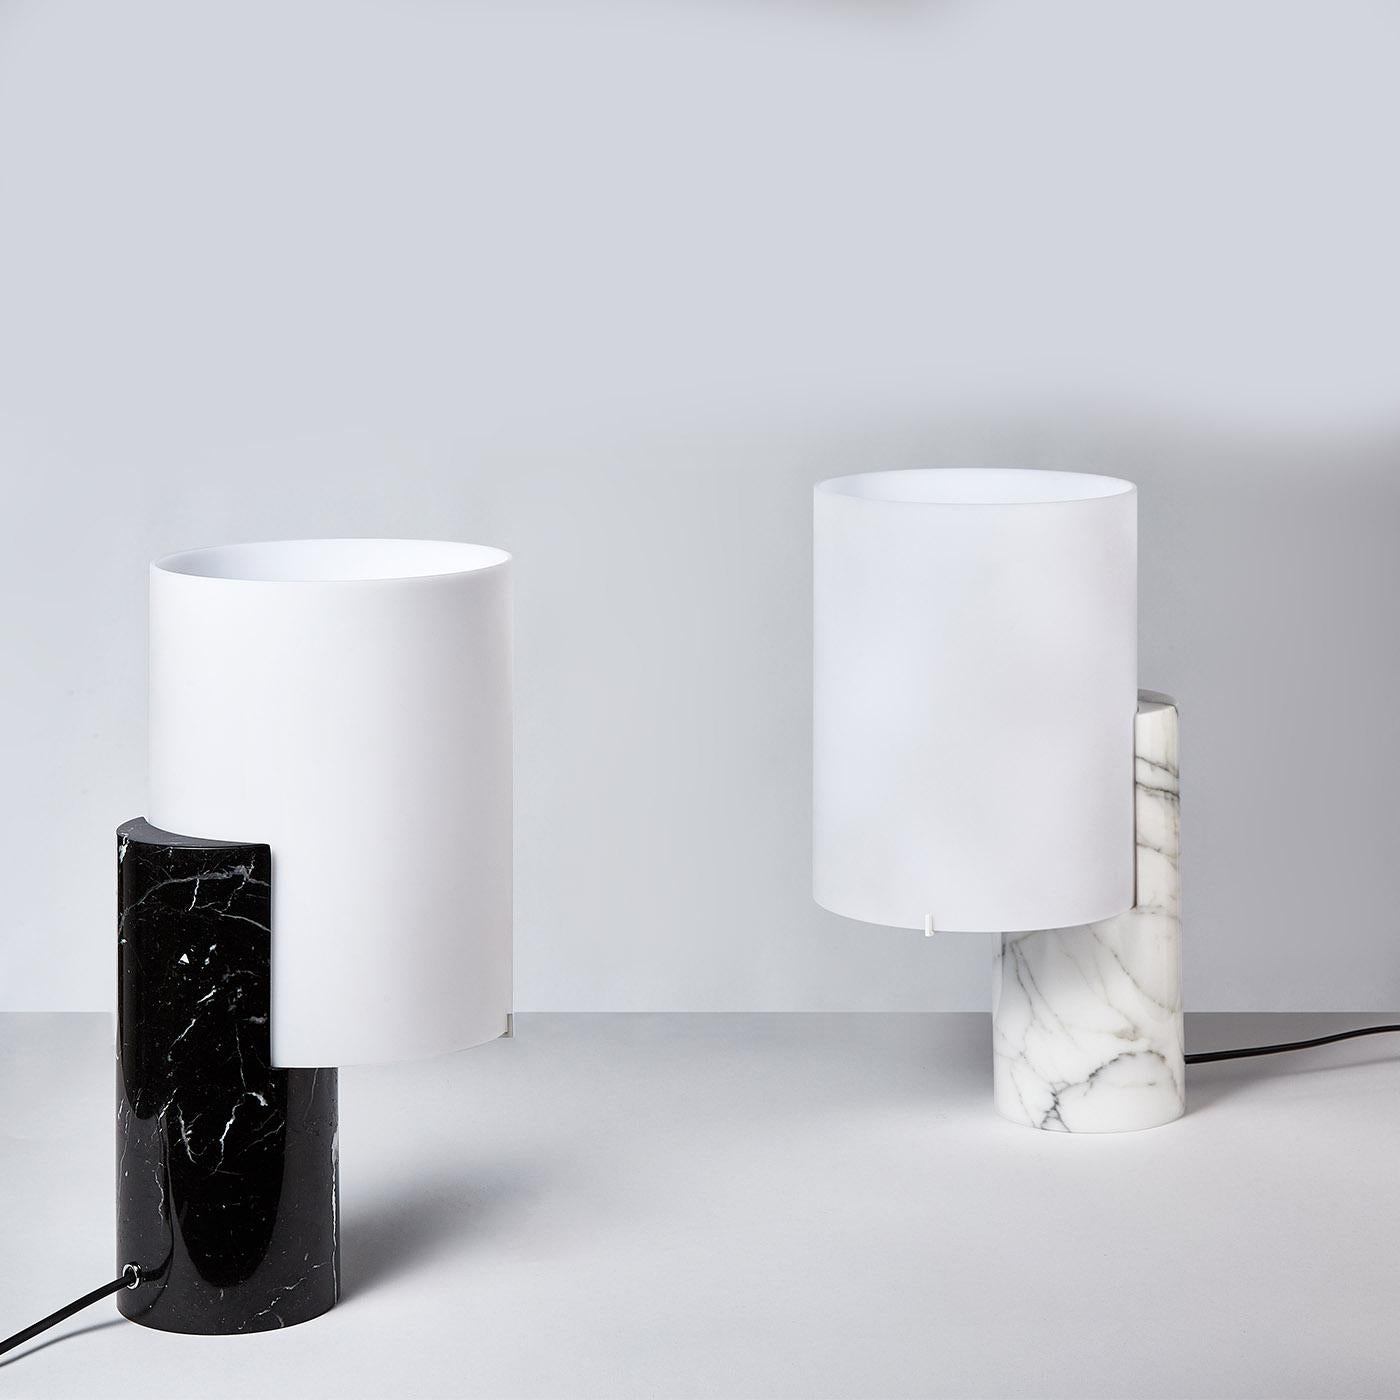 This gorgeous table lamp celebrates simplicity and quality. Handmade of first-rate materials rendered in clean shapes, it features a black Marquina marble body, and a satin white shade made of polycarbonate. Designed by Matteo Nunziati, it supports